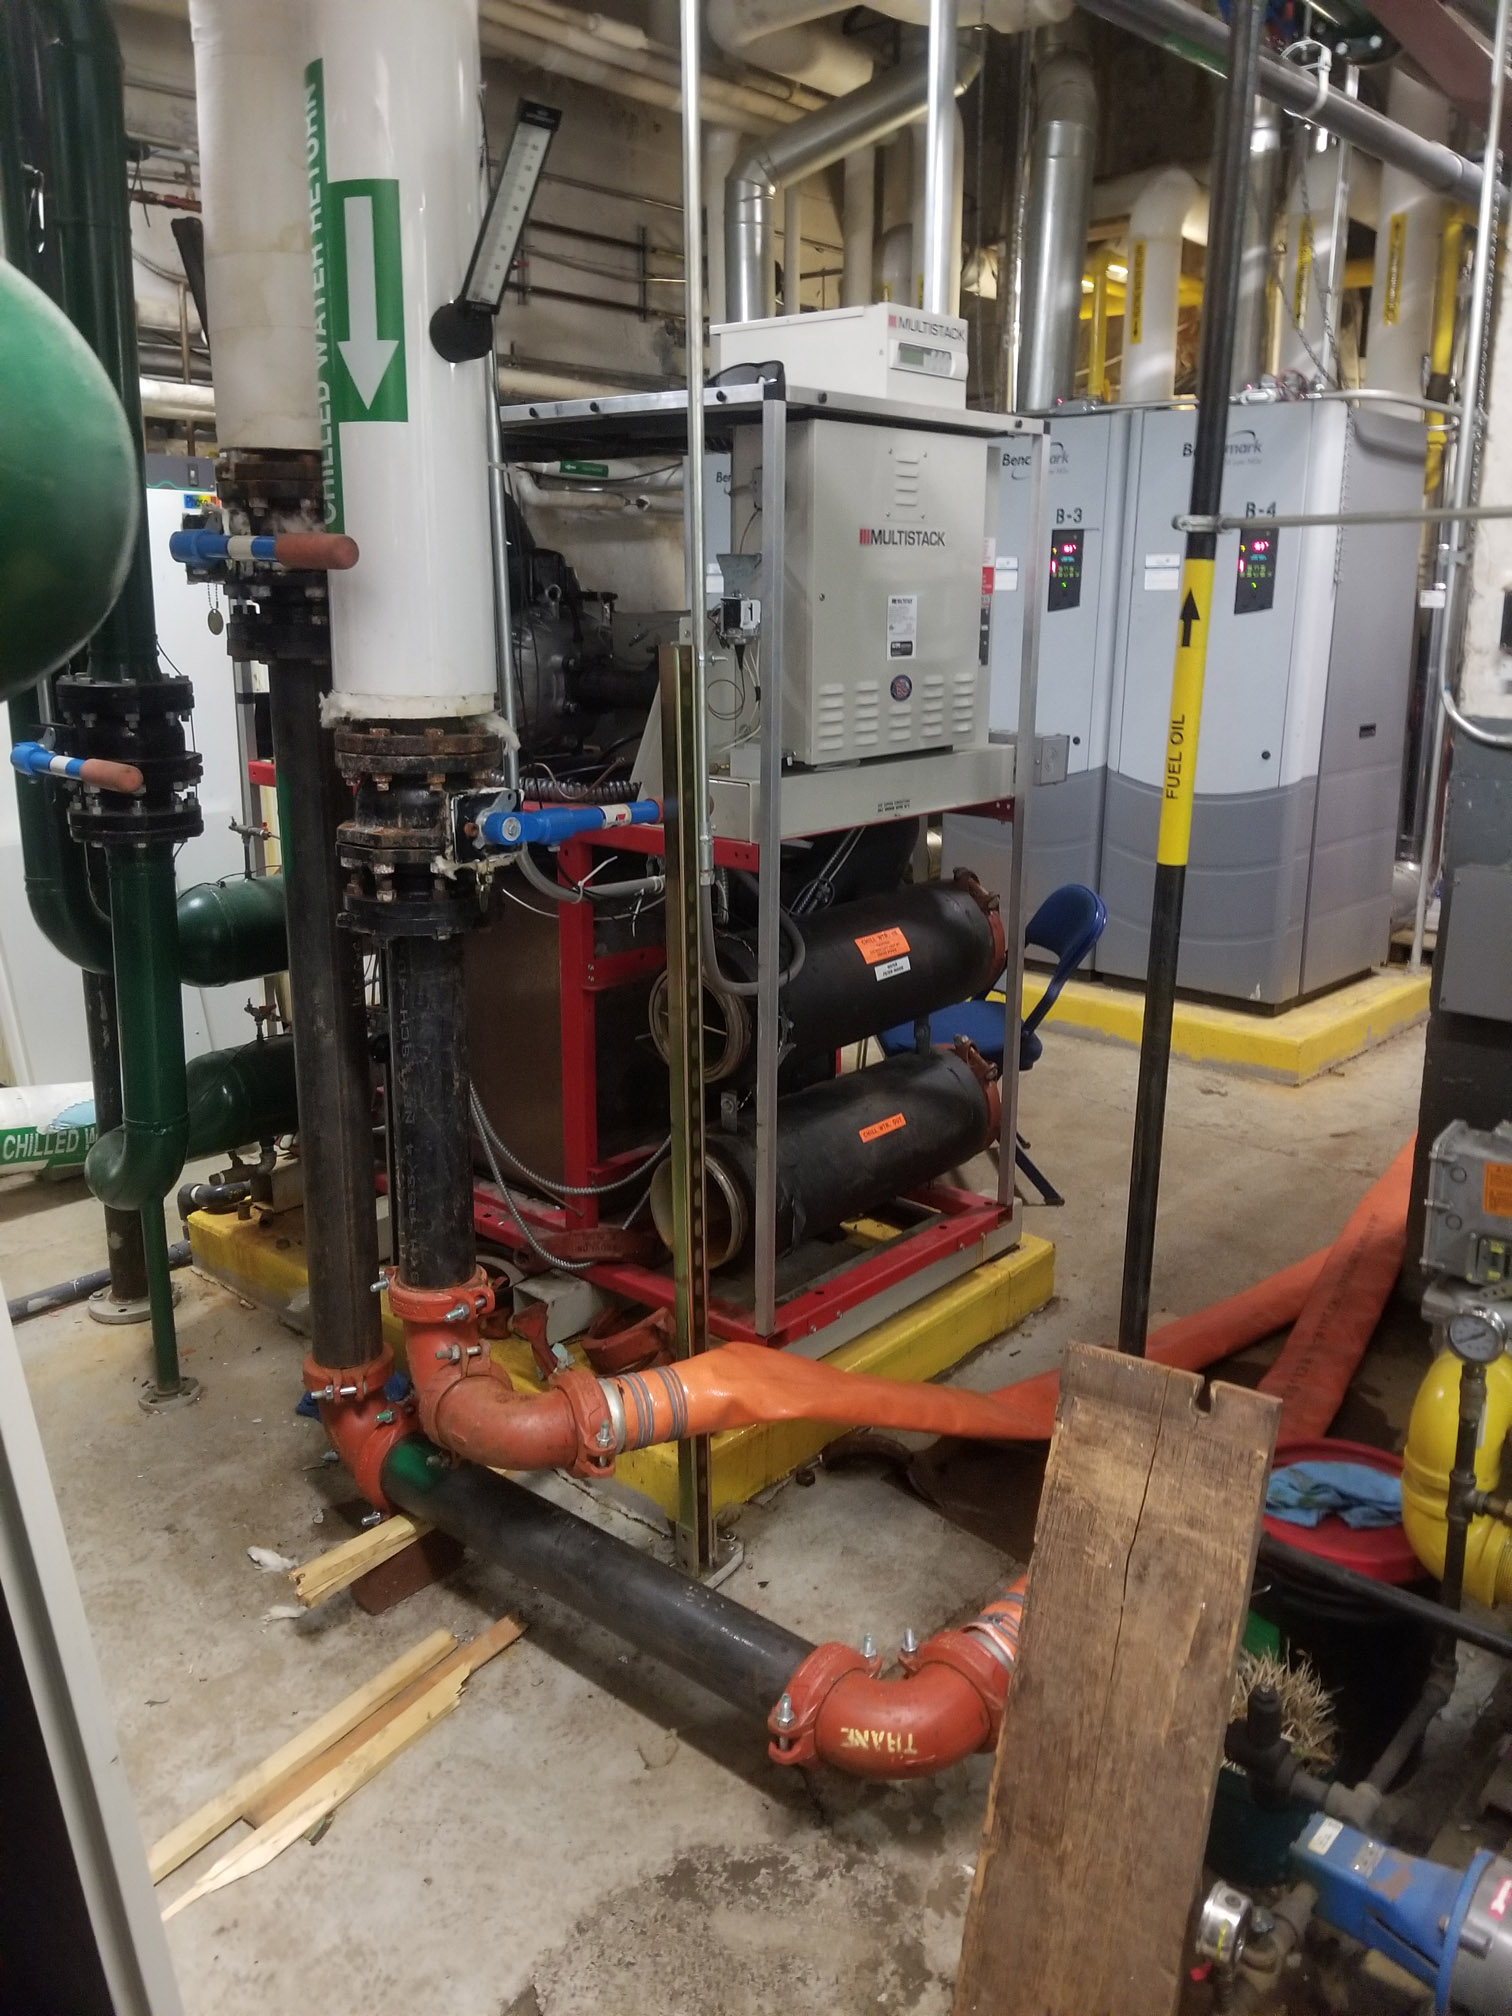 Air Cooled Chiller Rental Levy County FL, Chiller AC Rental Levy County FL, Temporary Chiller Levy County FL, Rental Chiller Installation Levy County FL